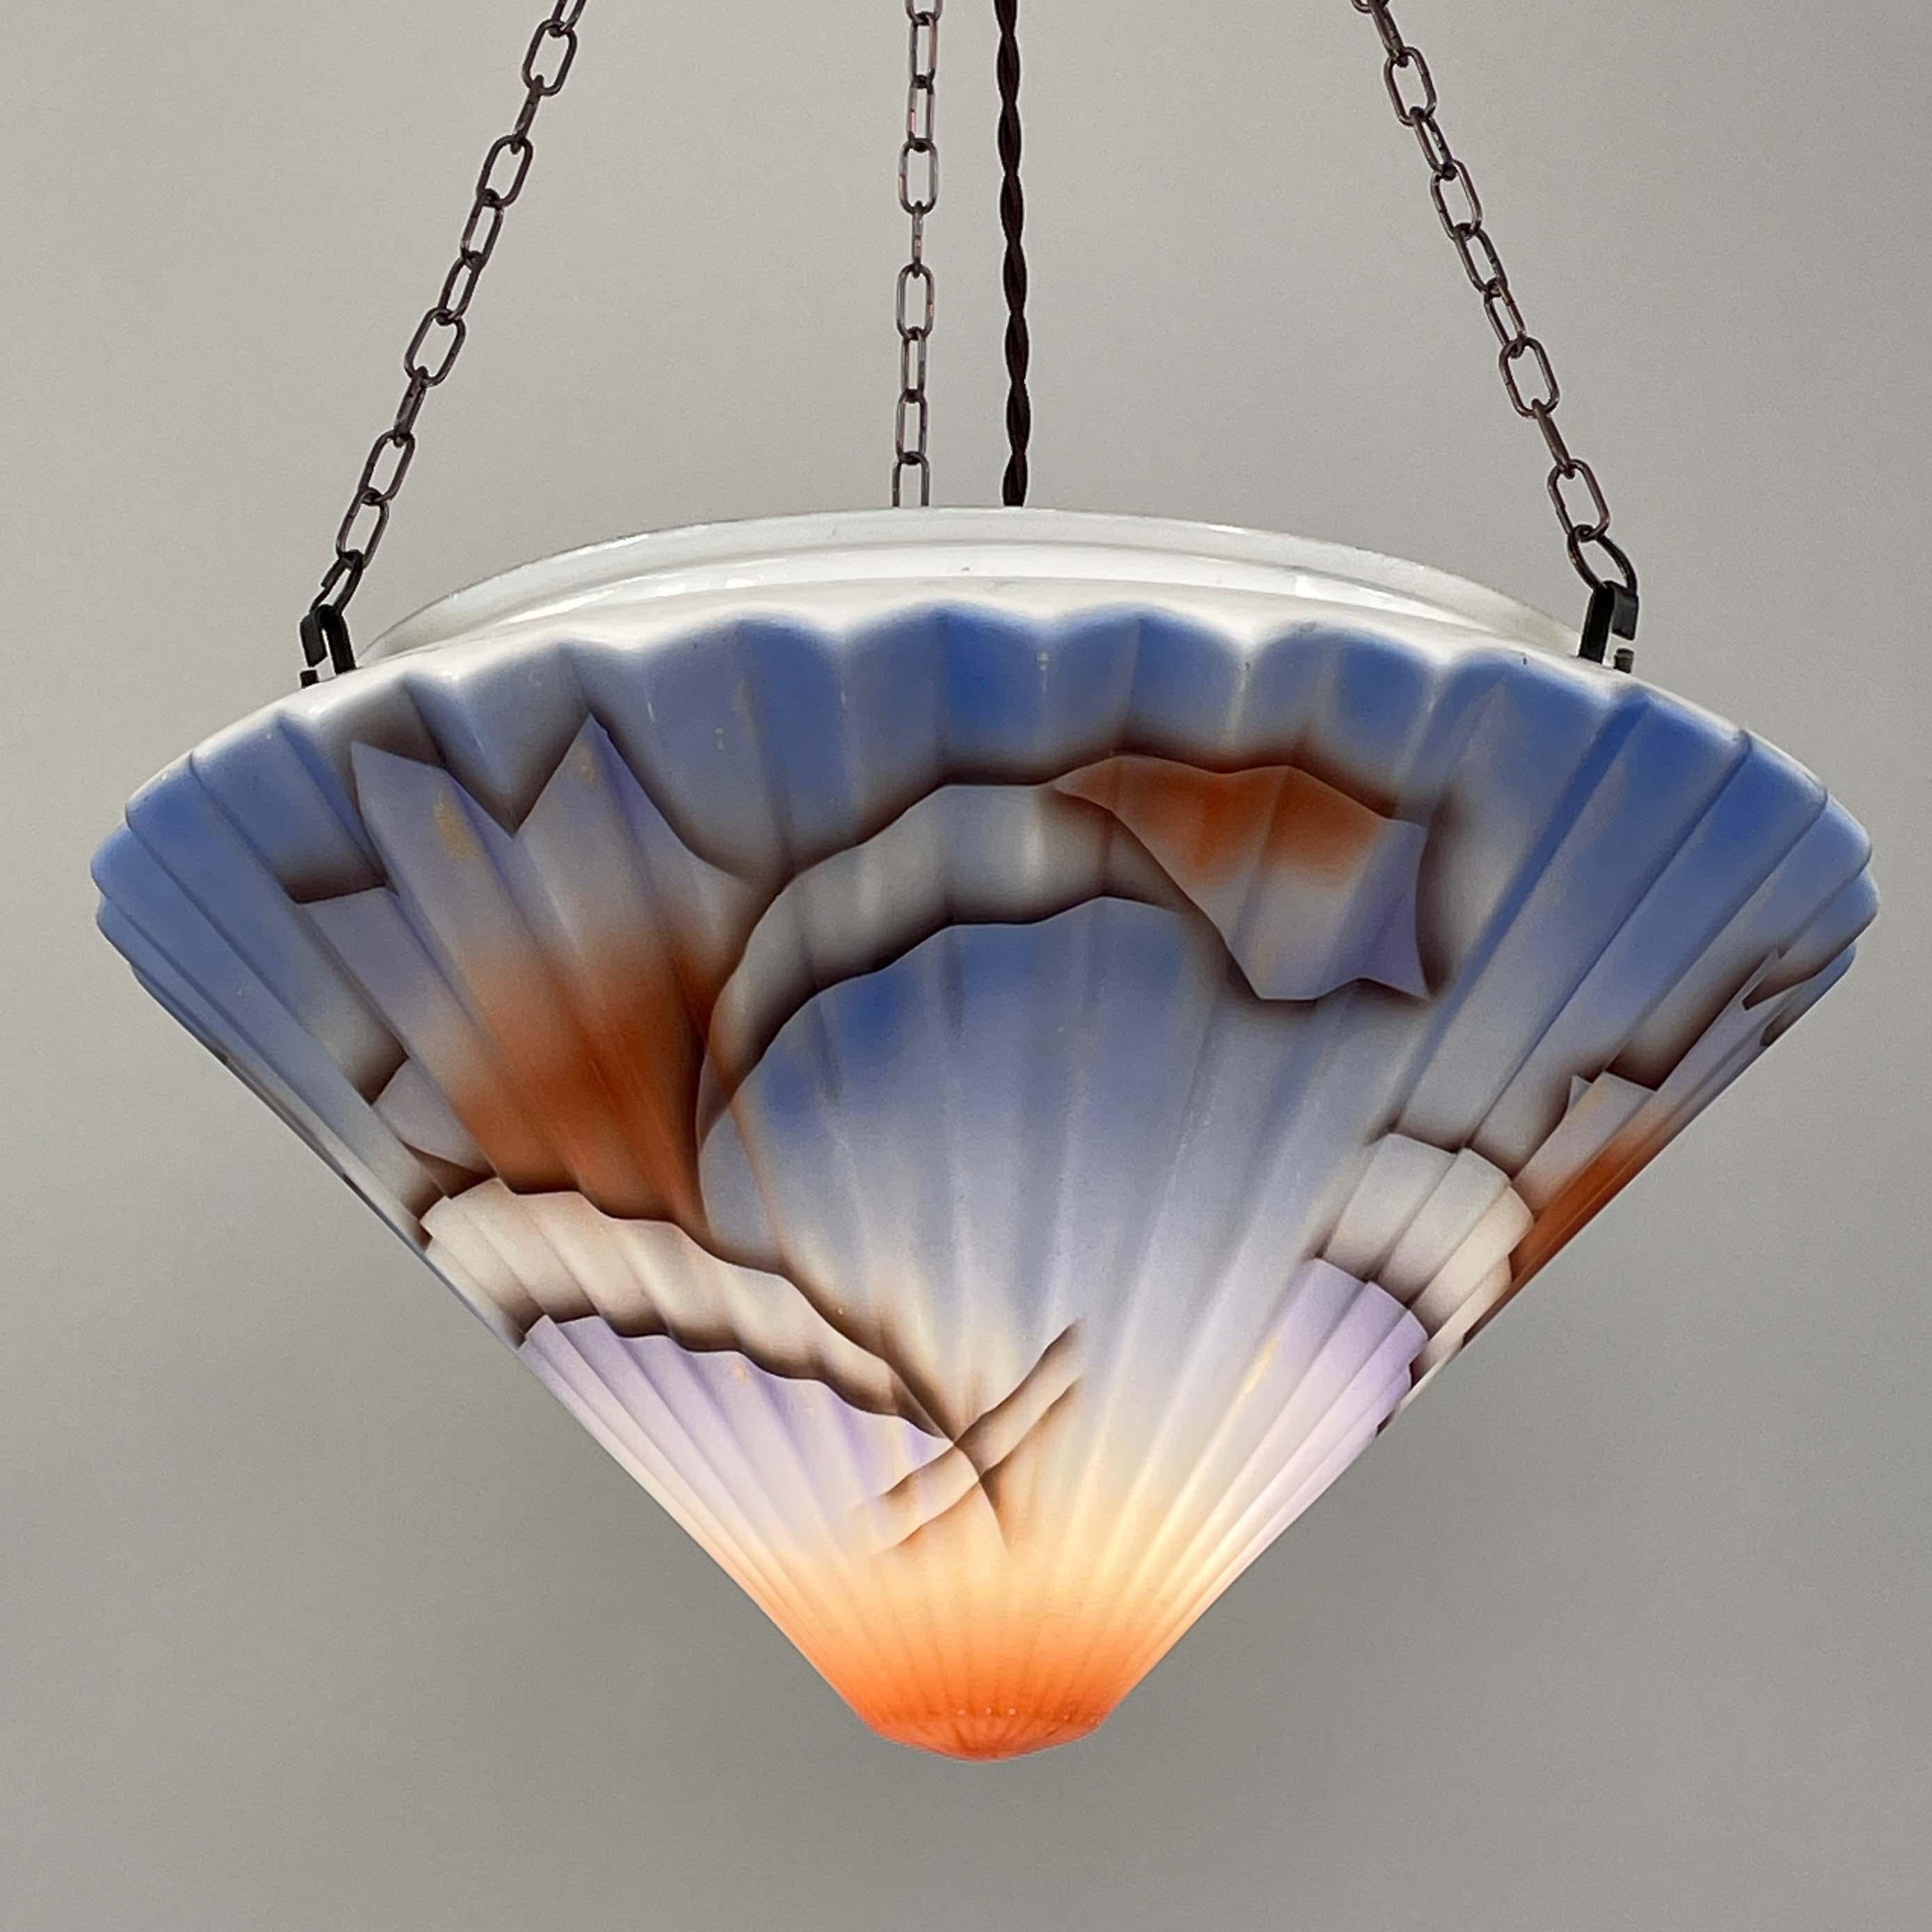 Art Deco Suspension Light, Enameled Glass and Bronzed Brass, Germany 1930s For Sale 11